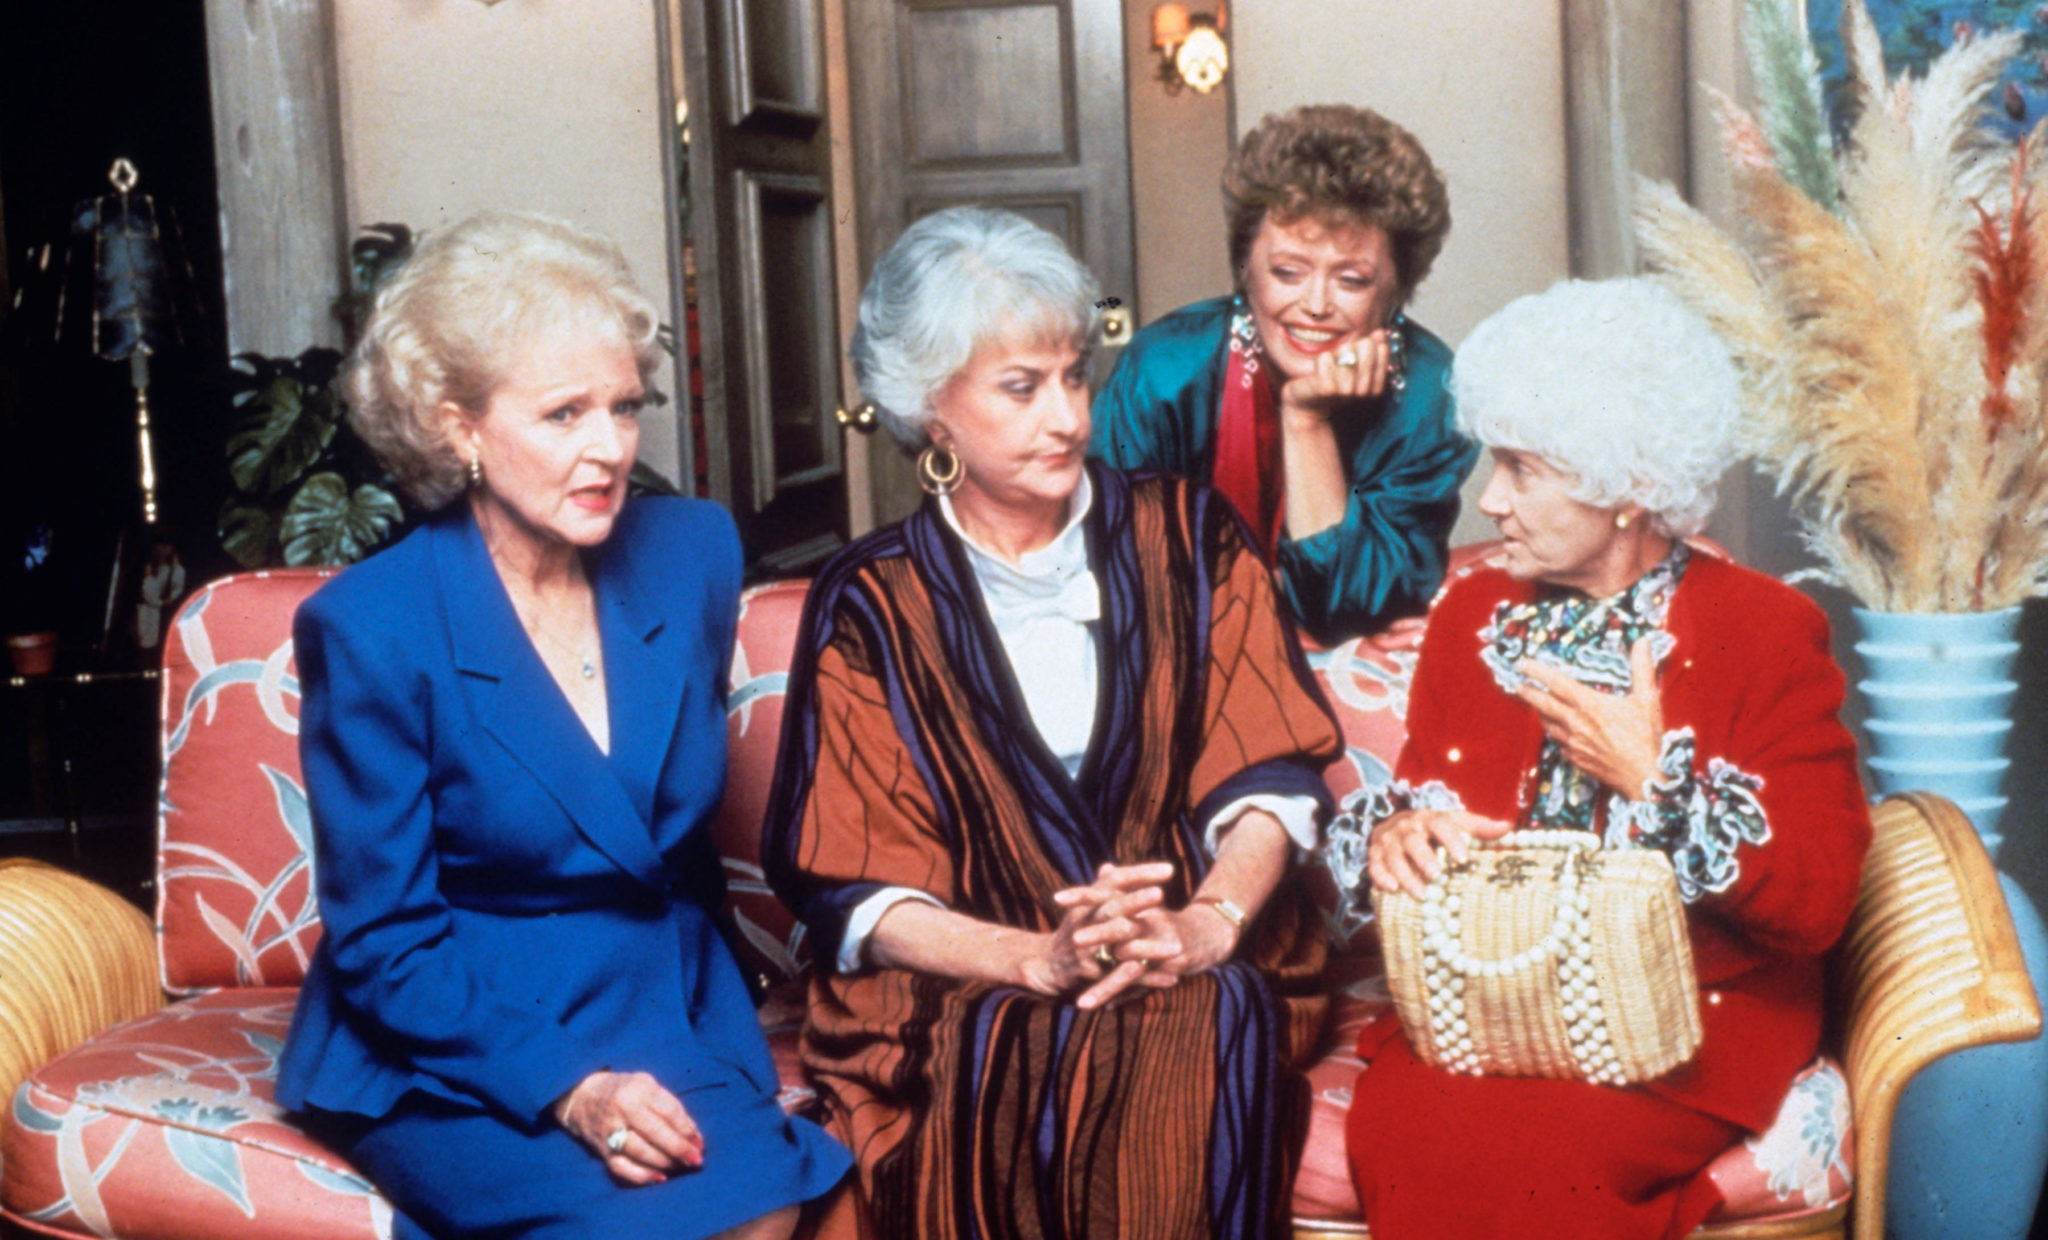 'The Golden Girls' Betty White, Bea Arthur, Rue McClanahan and Estelle Getty